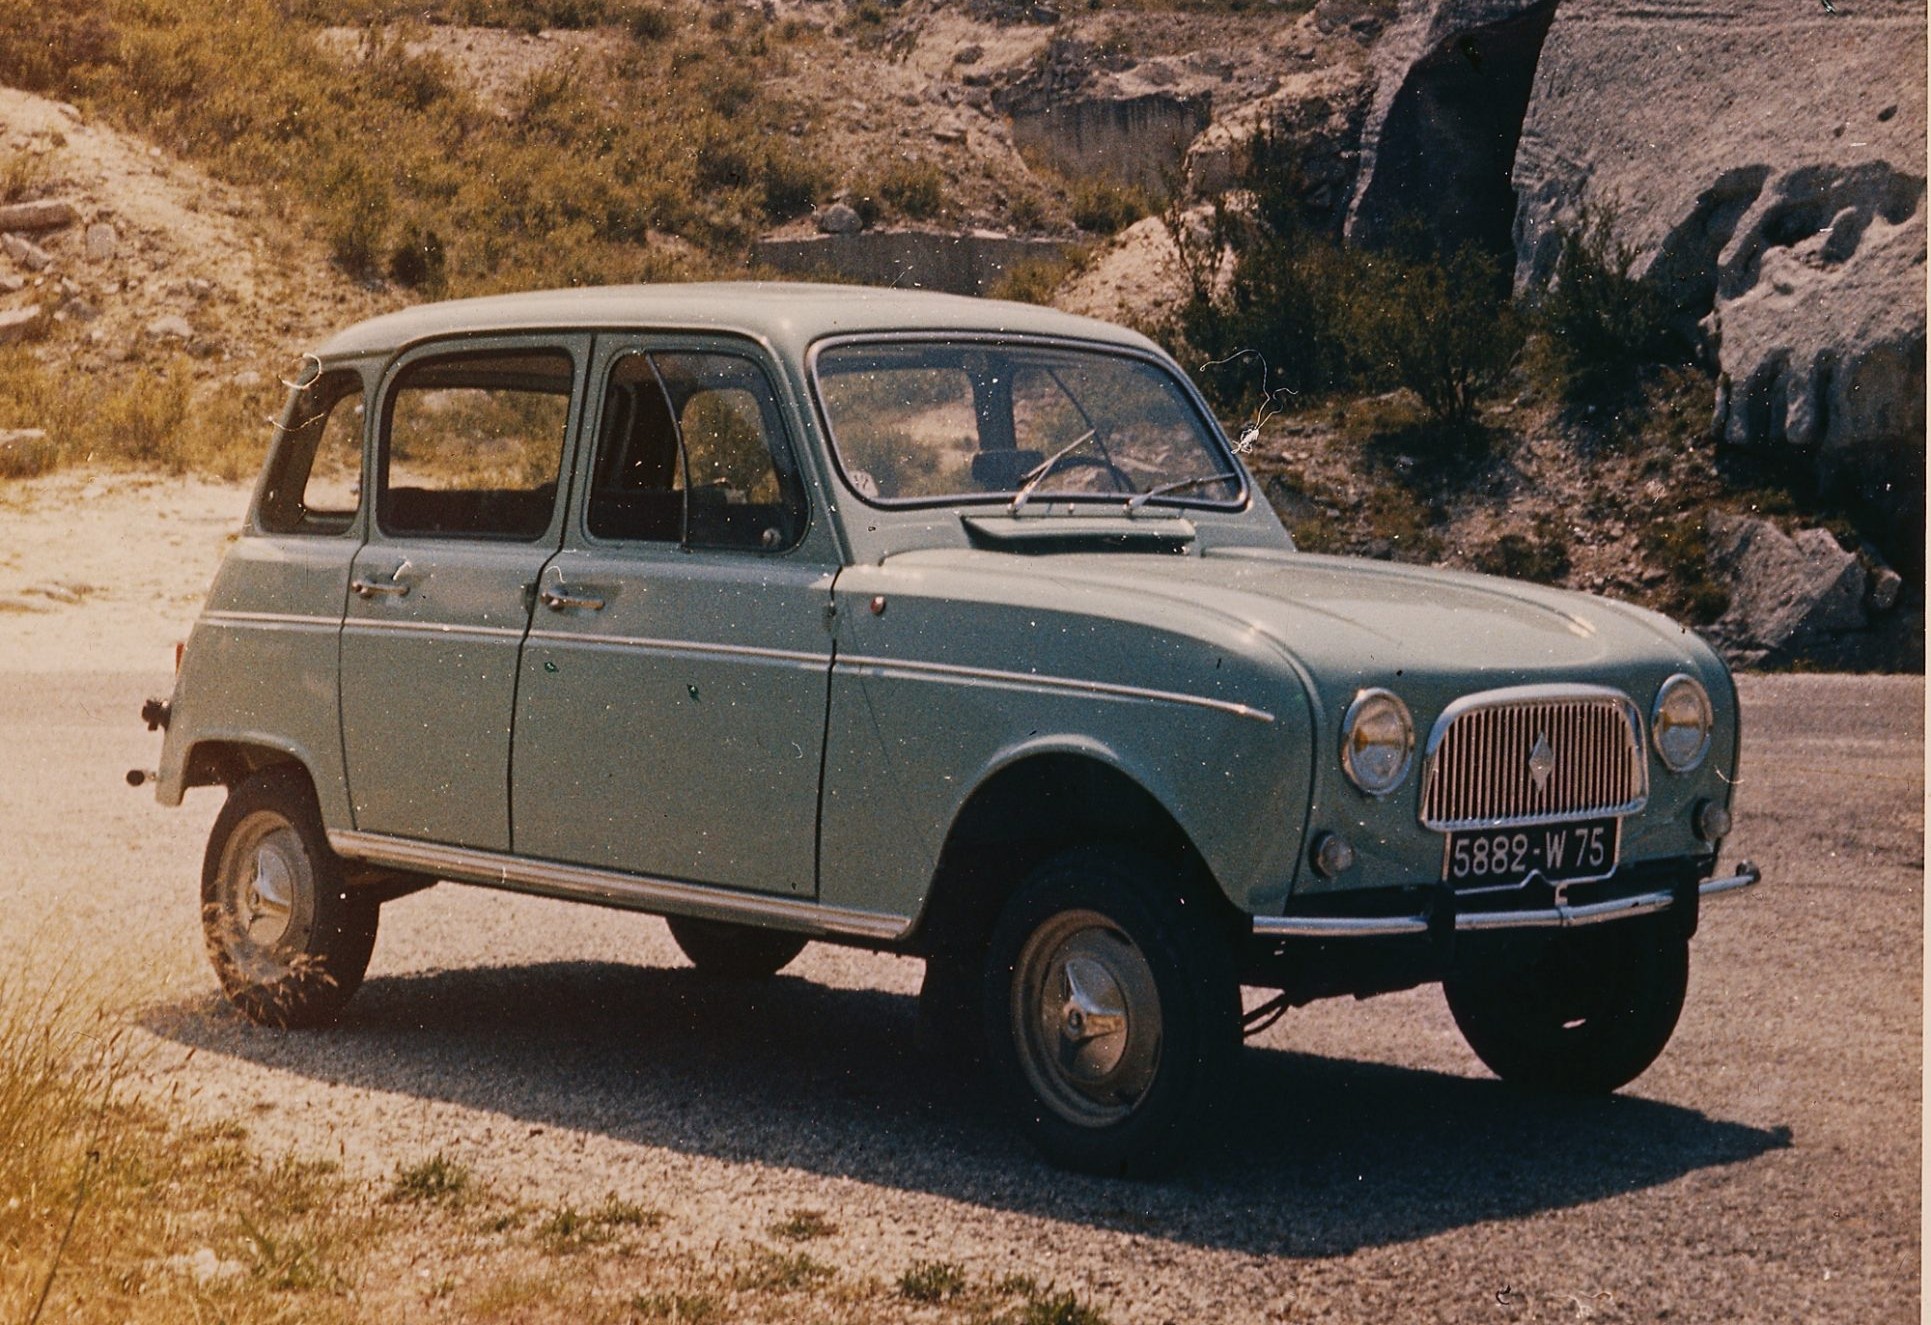 Renault 4 60 years of a cult car